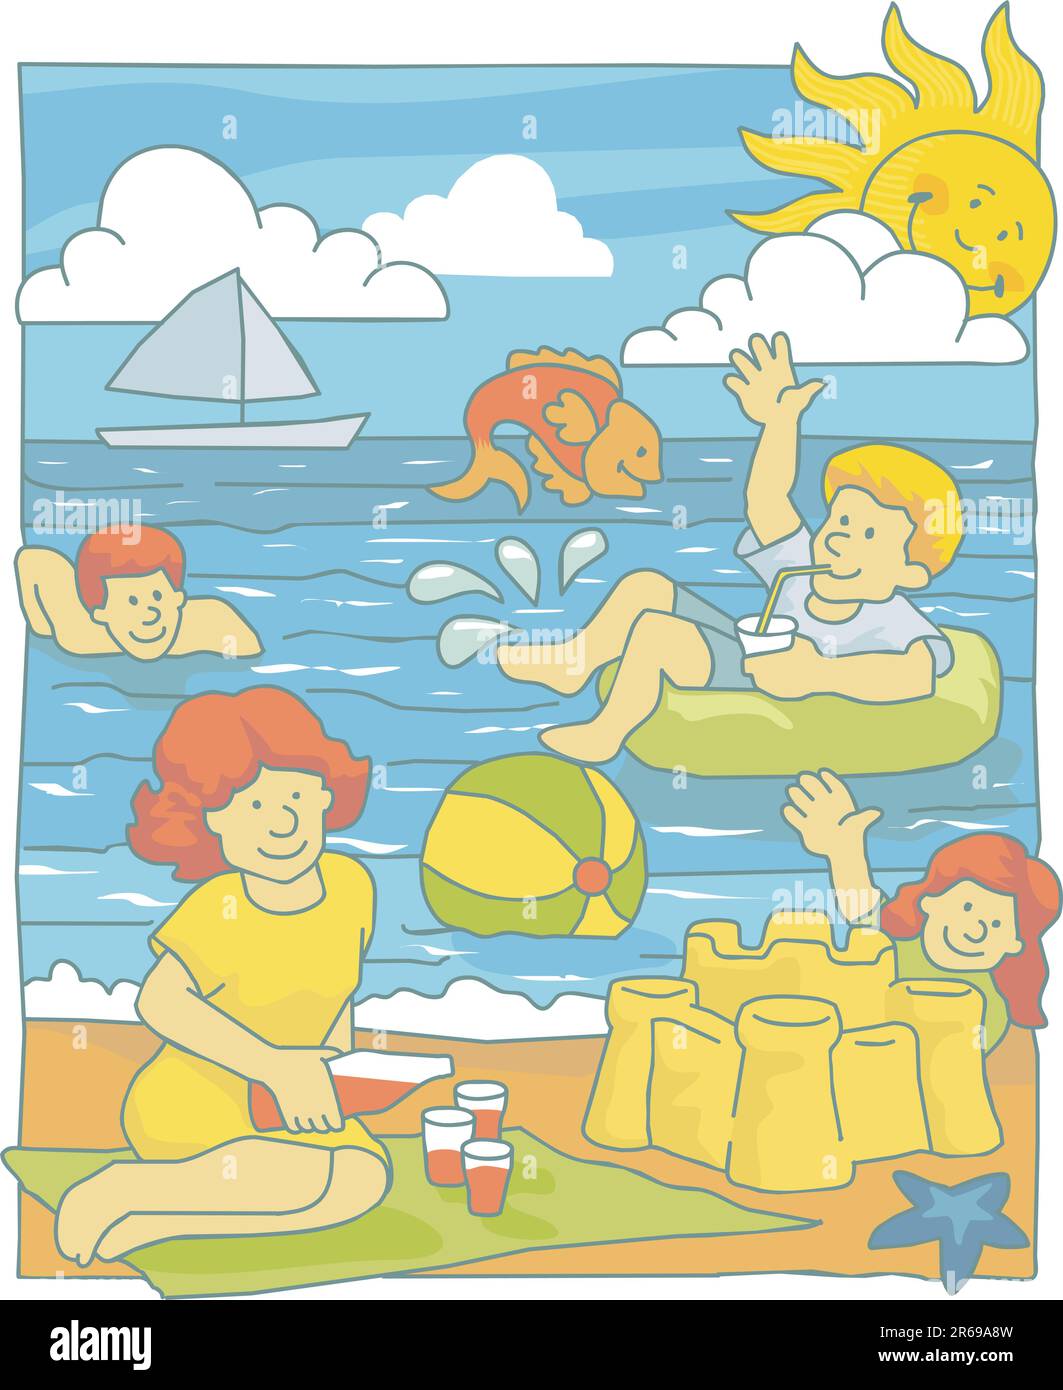 Illustration of a family having fun at the beach Stock Vector